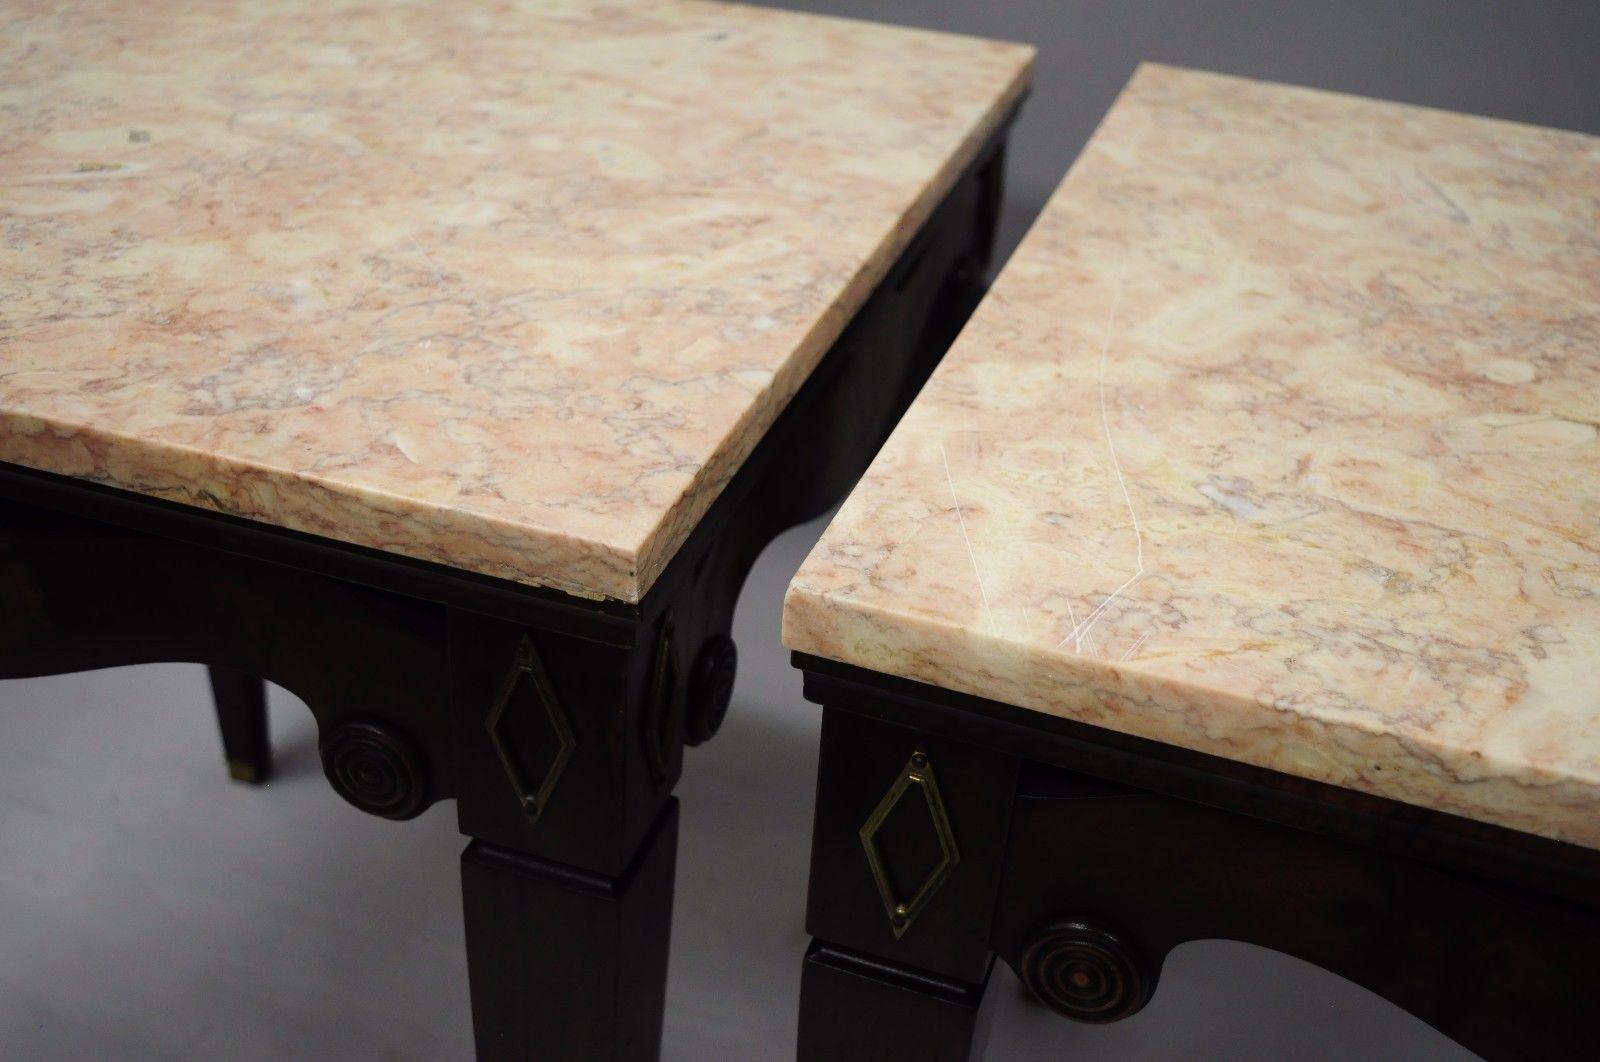 Pair of Antique Pink Marble-Top Mahogany End Tables Regency Square Weiman Era 1